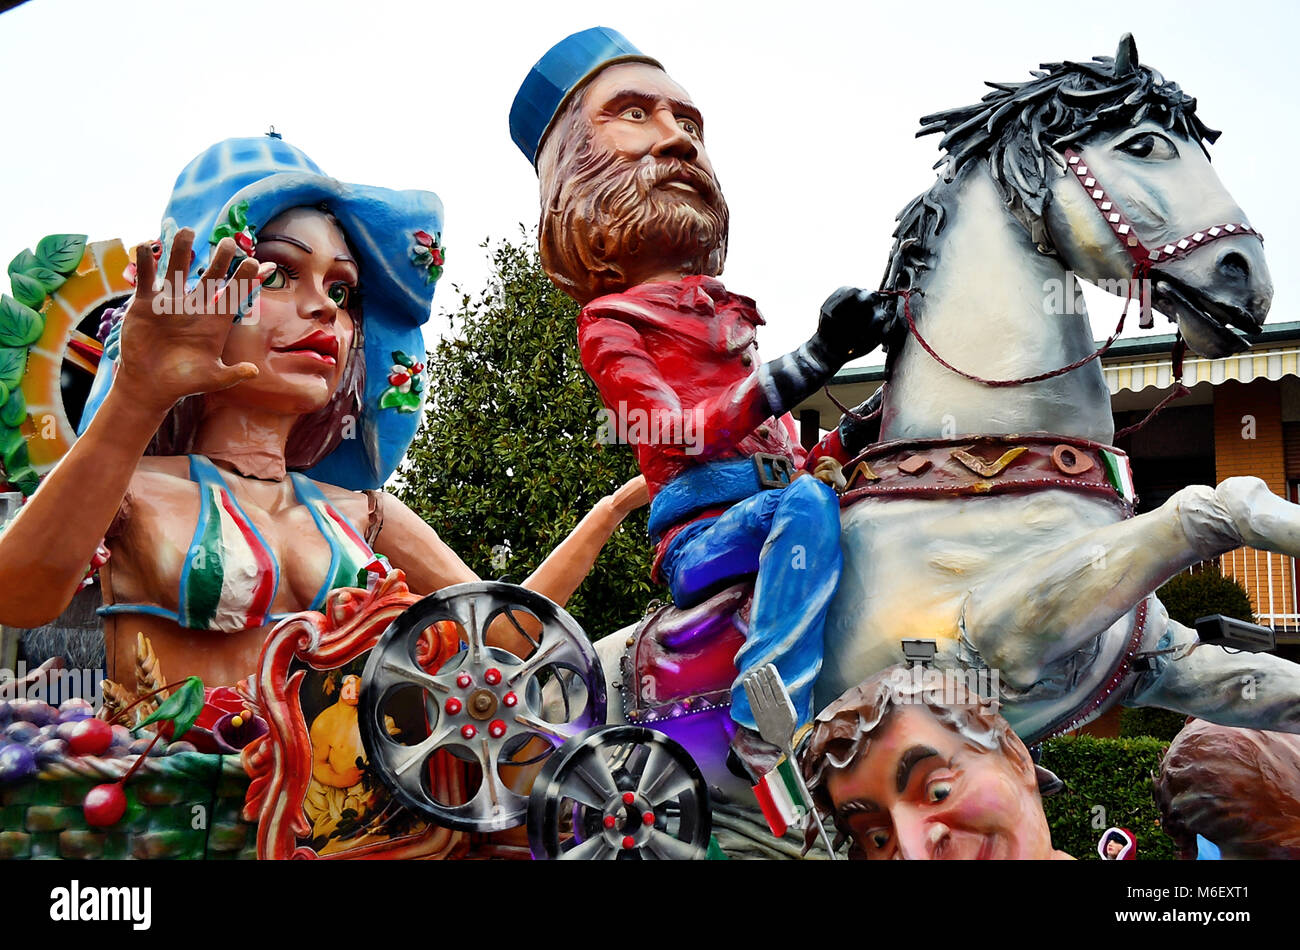 Cadoneghe, Veneto, Italy. The carnival of Cadoneghe is famous throughout the region for its allegorical floats. they are made of papier-mâché and are towed by farm tractors. Stock Photo